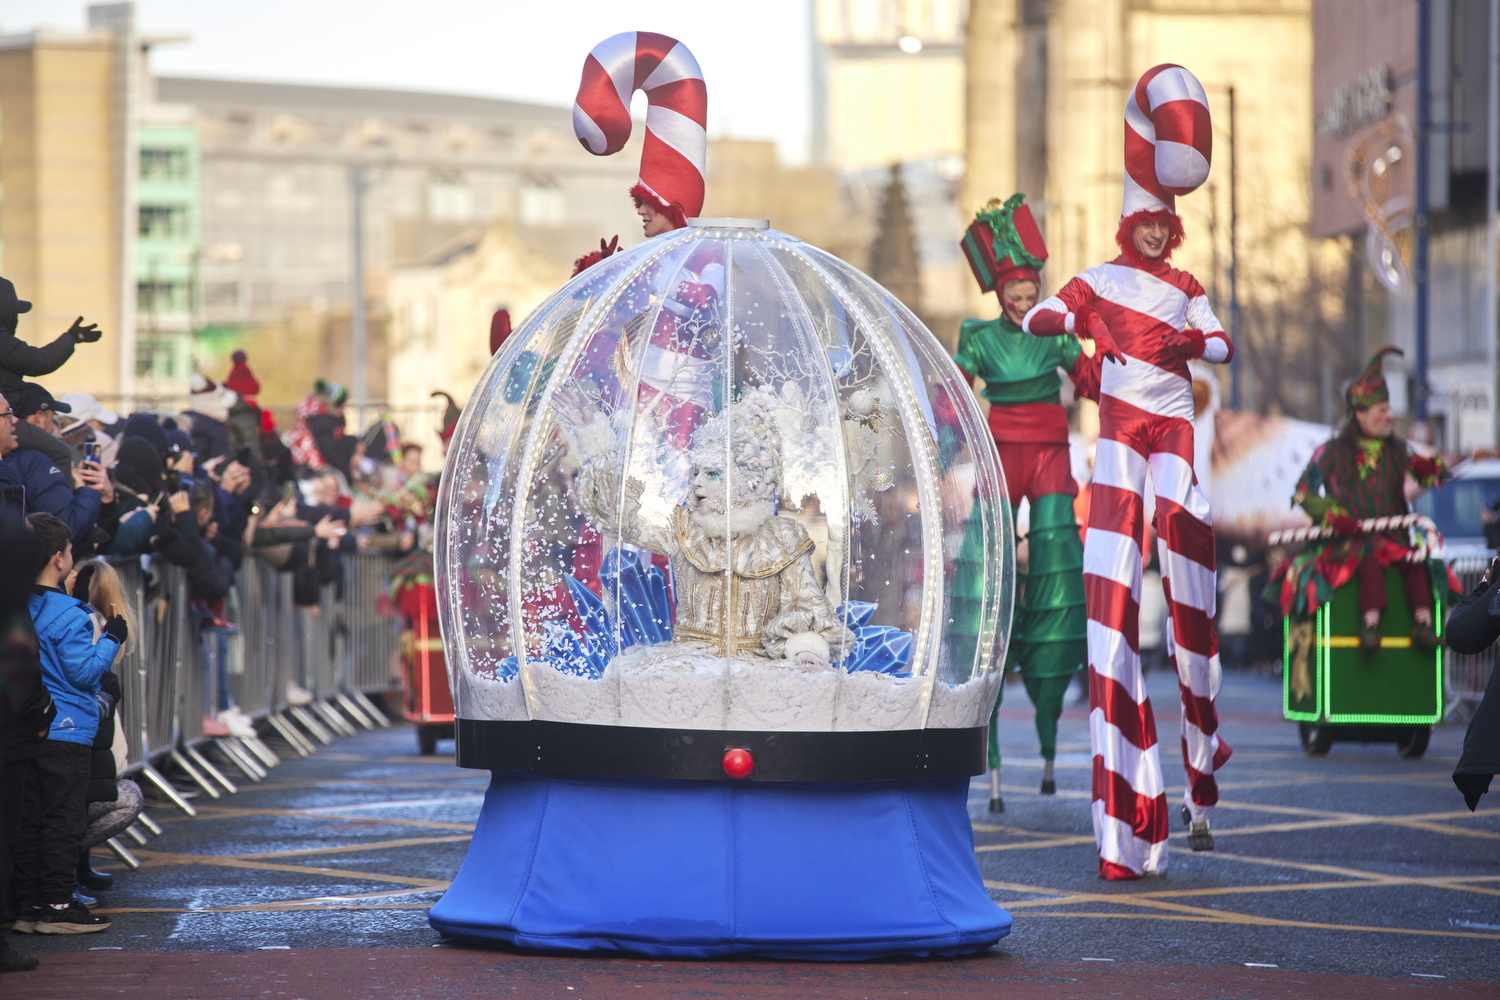 A giant snow globe with a snow queen inside pictured with candy cane stilt walkers either side parading along a street